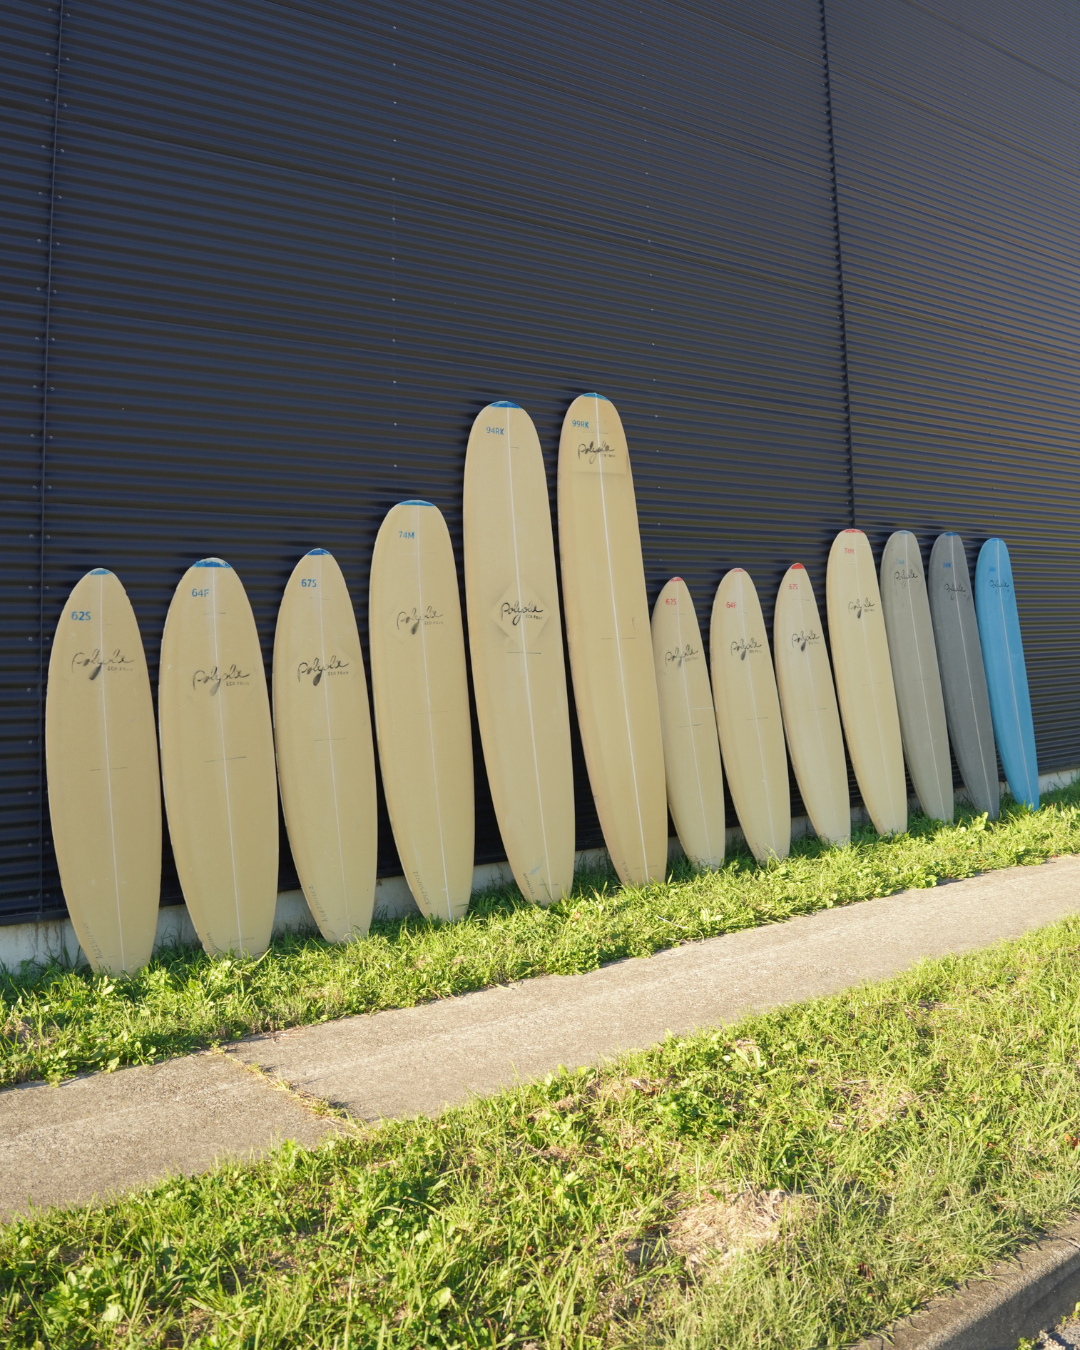 Our range of surfboard blanks. From 6'2 ft to 9'9 ft